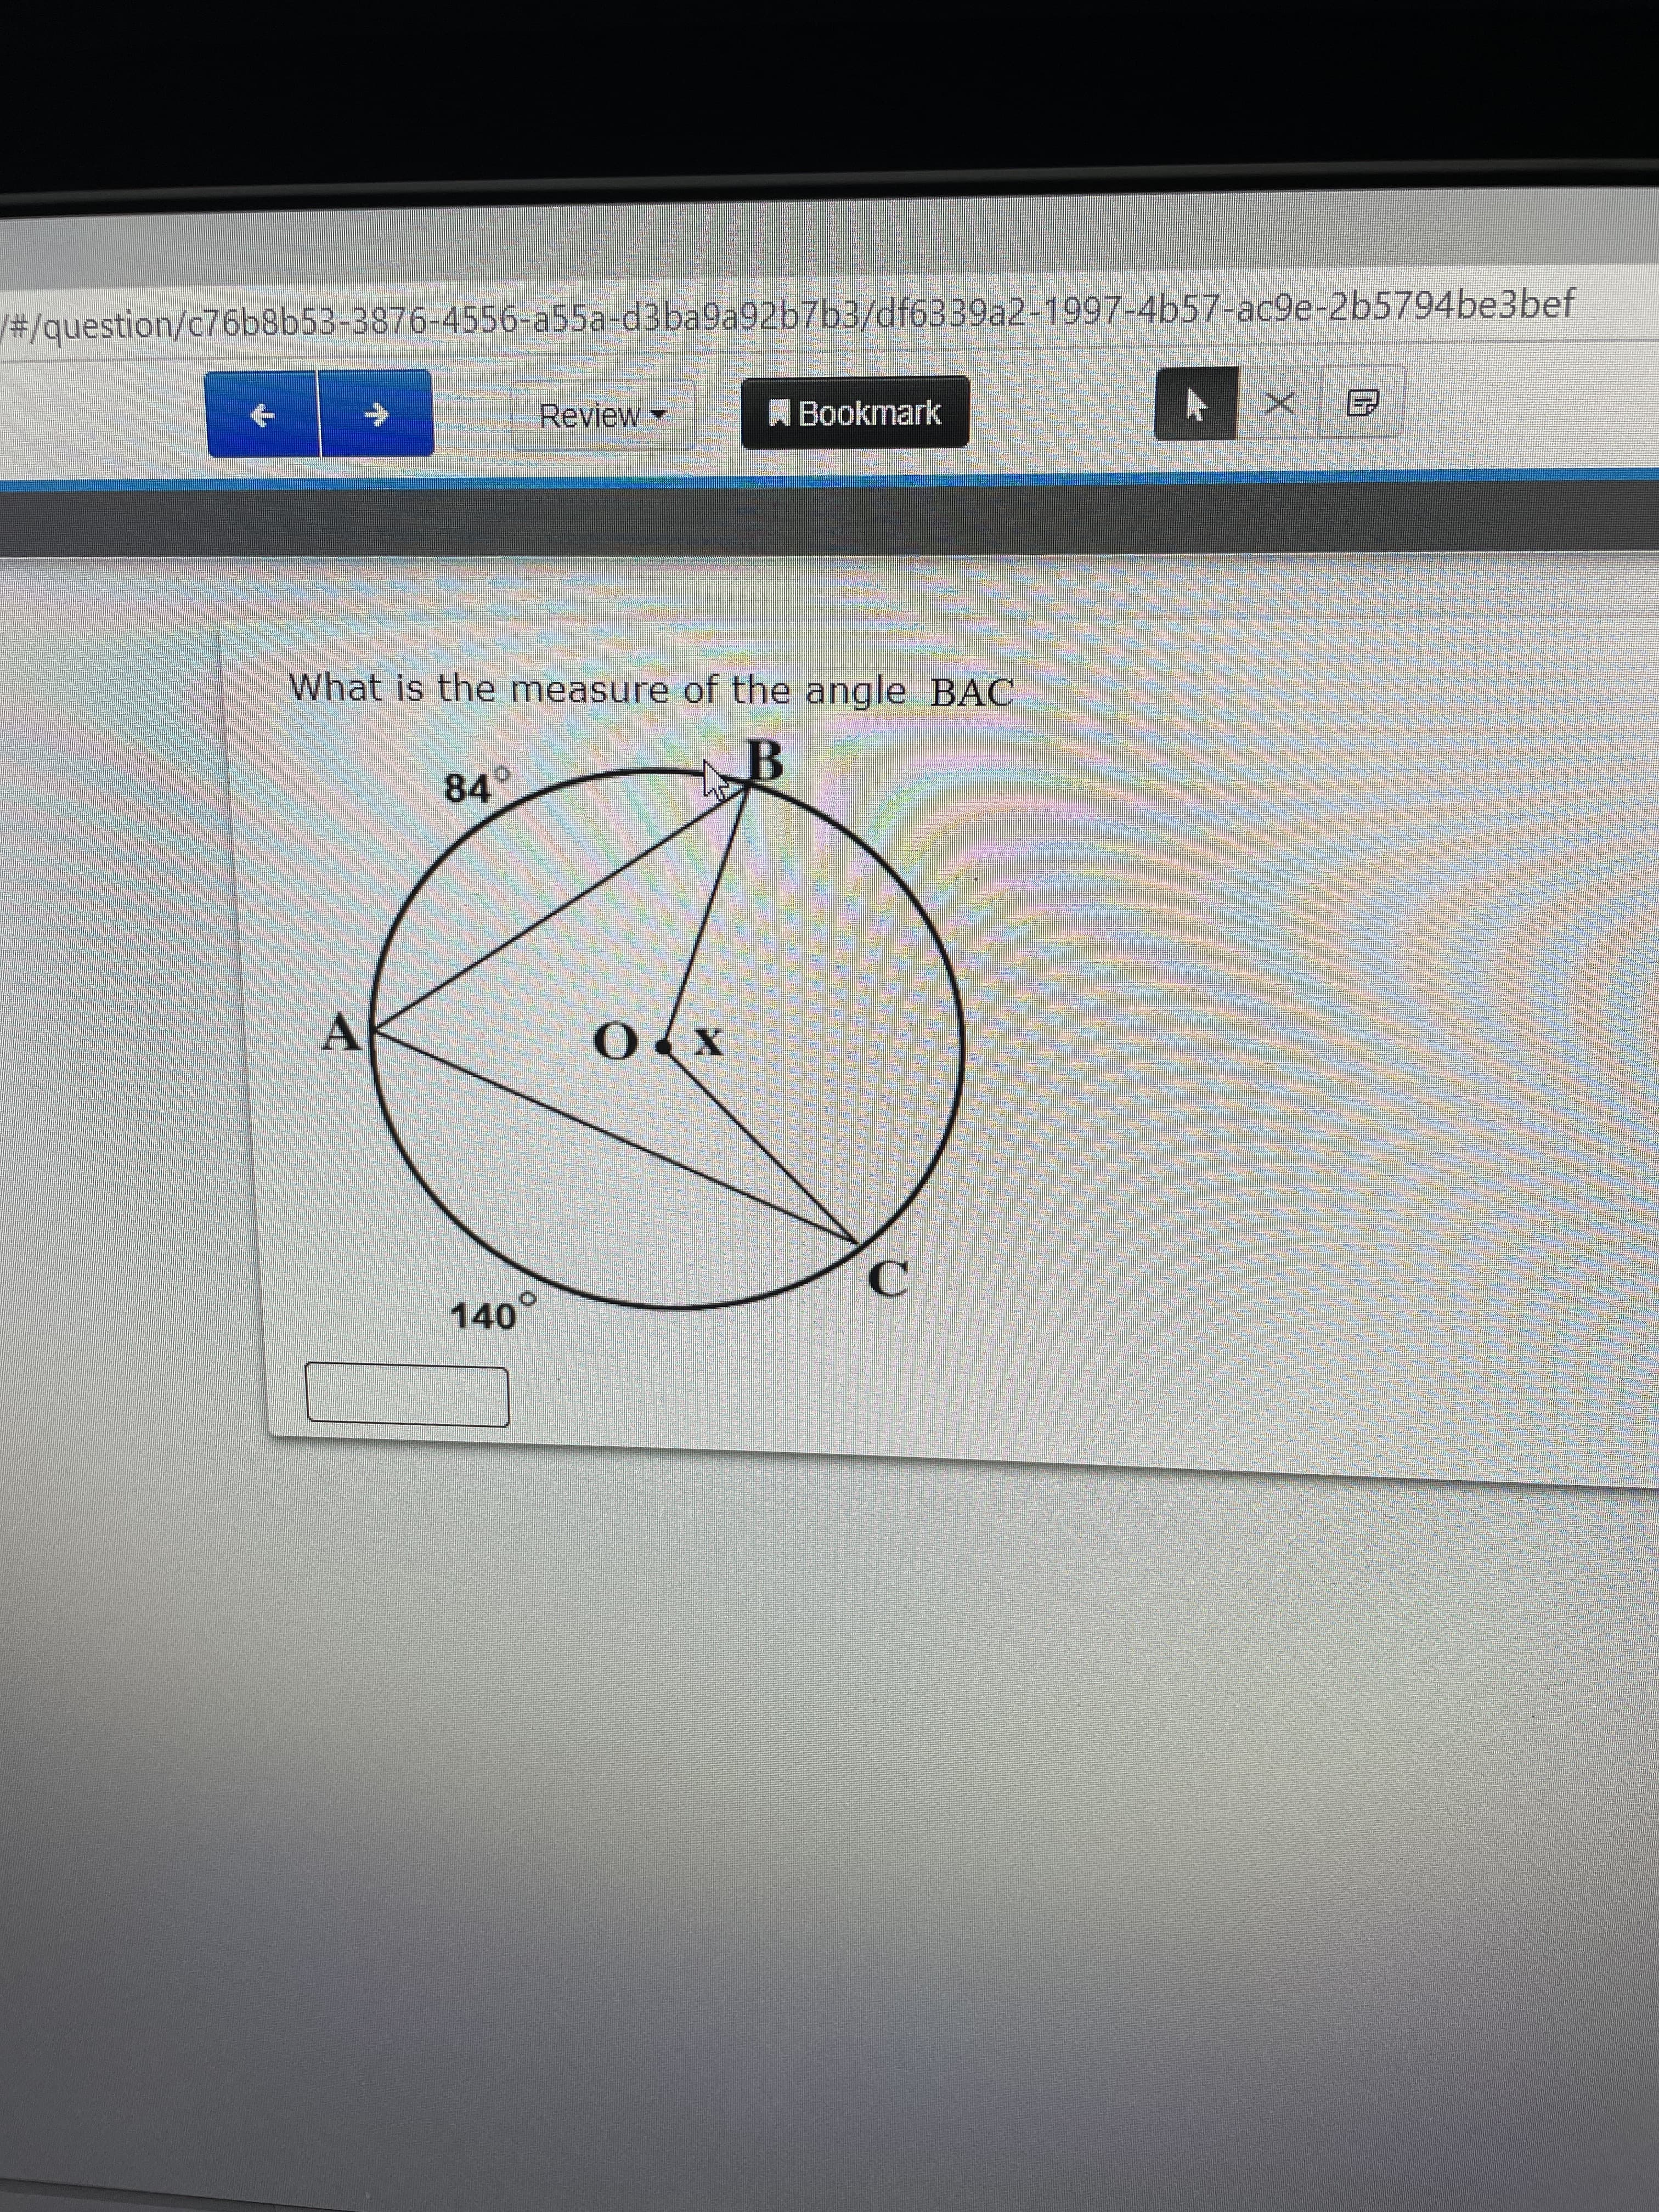 What is the measure of the angle BAC
